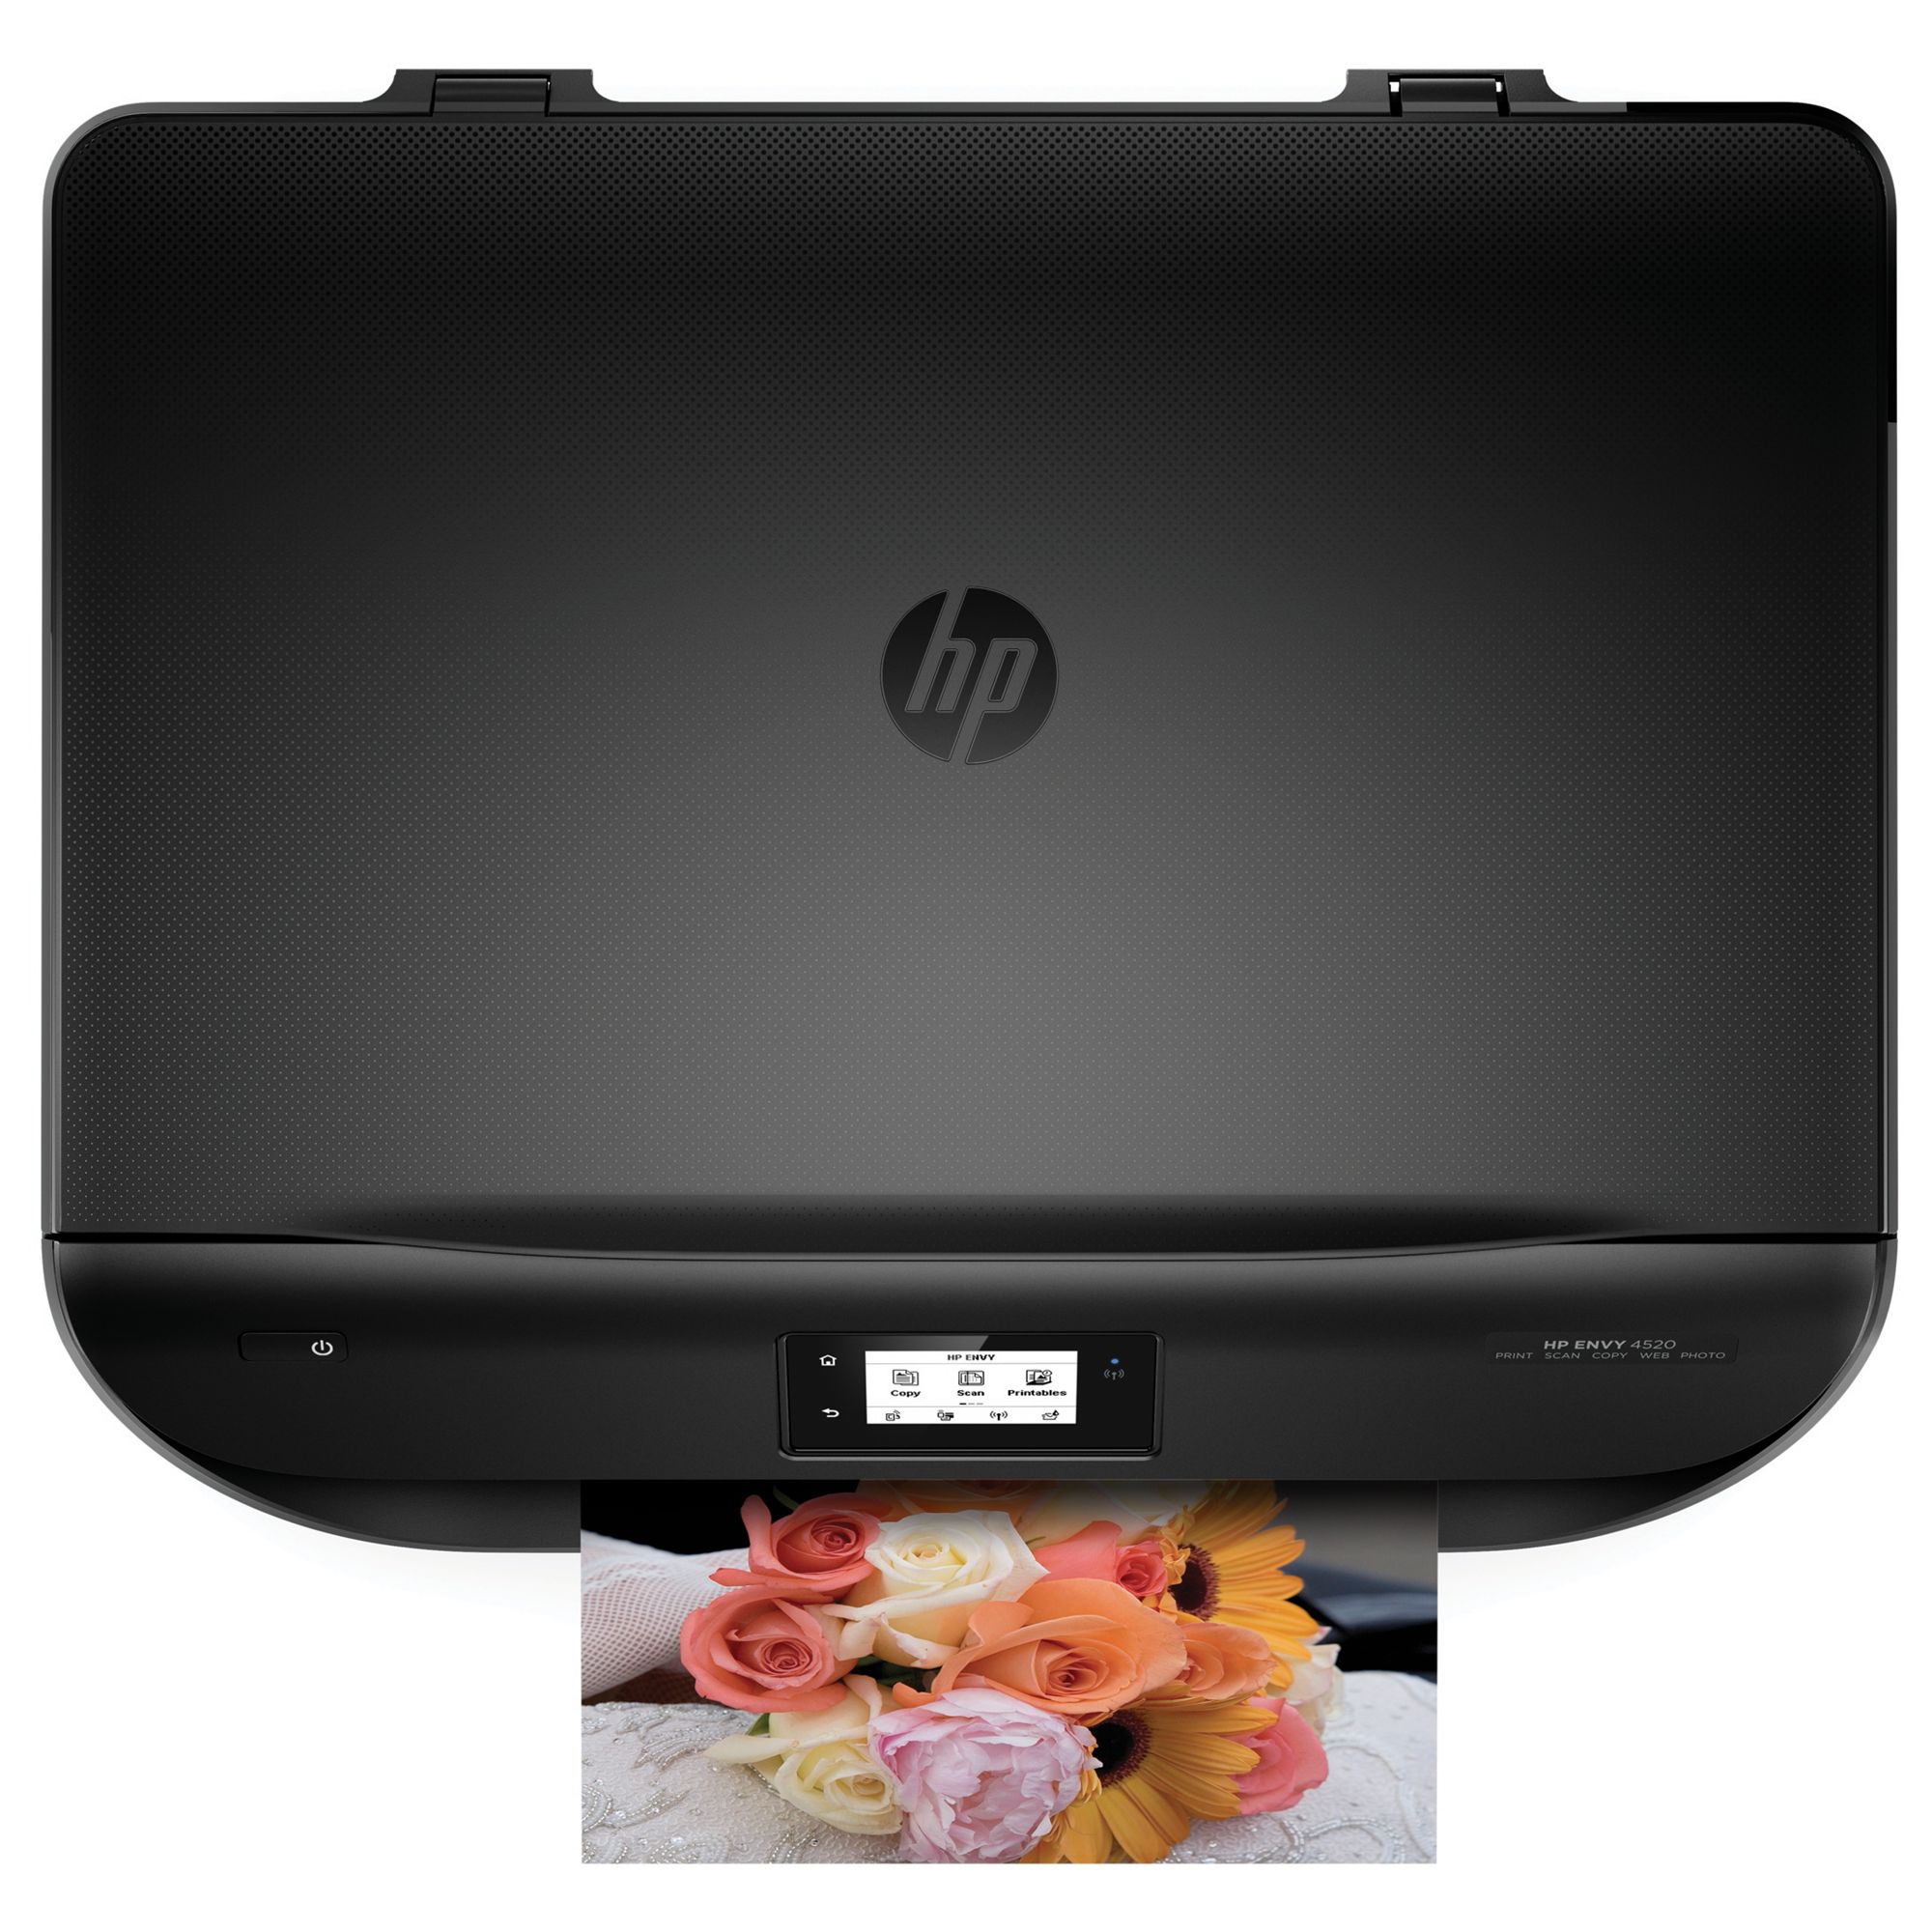 HP ENVY 4520 All-In-One Wireless Printer with Touch HP Instant Ink Ready